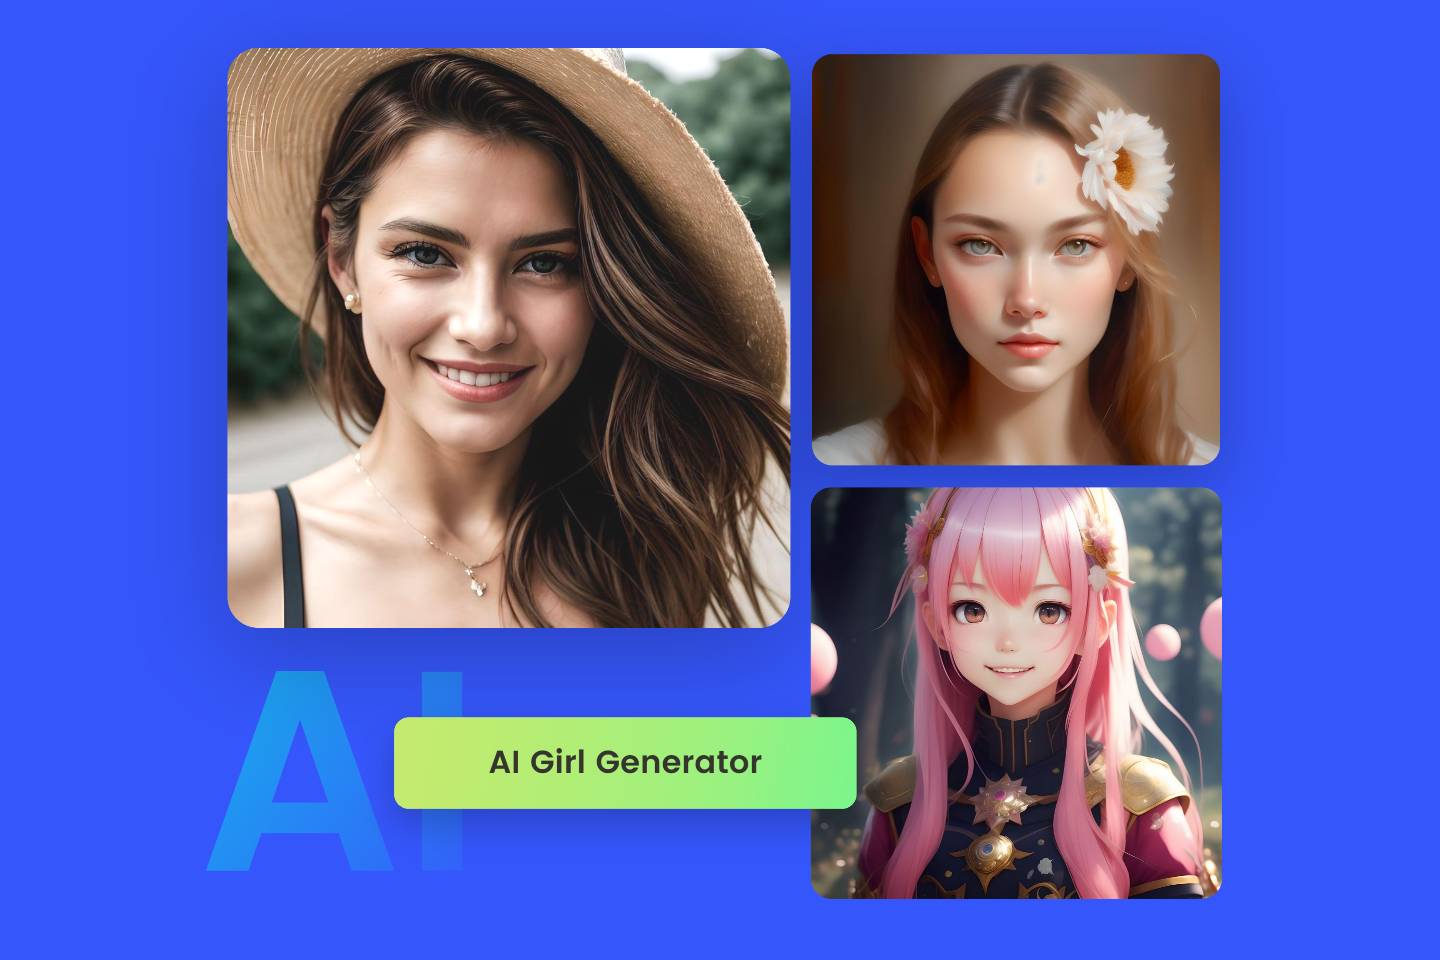 AI girl images in different styles generated by Fotor